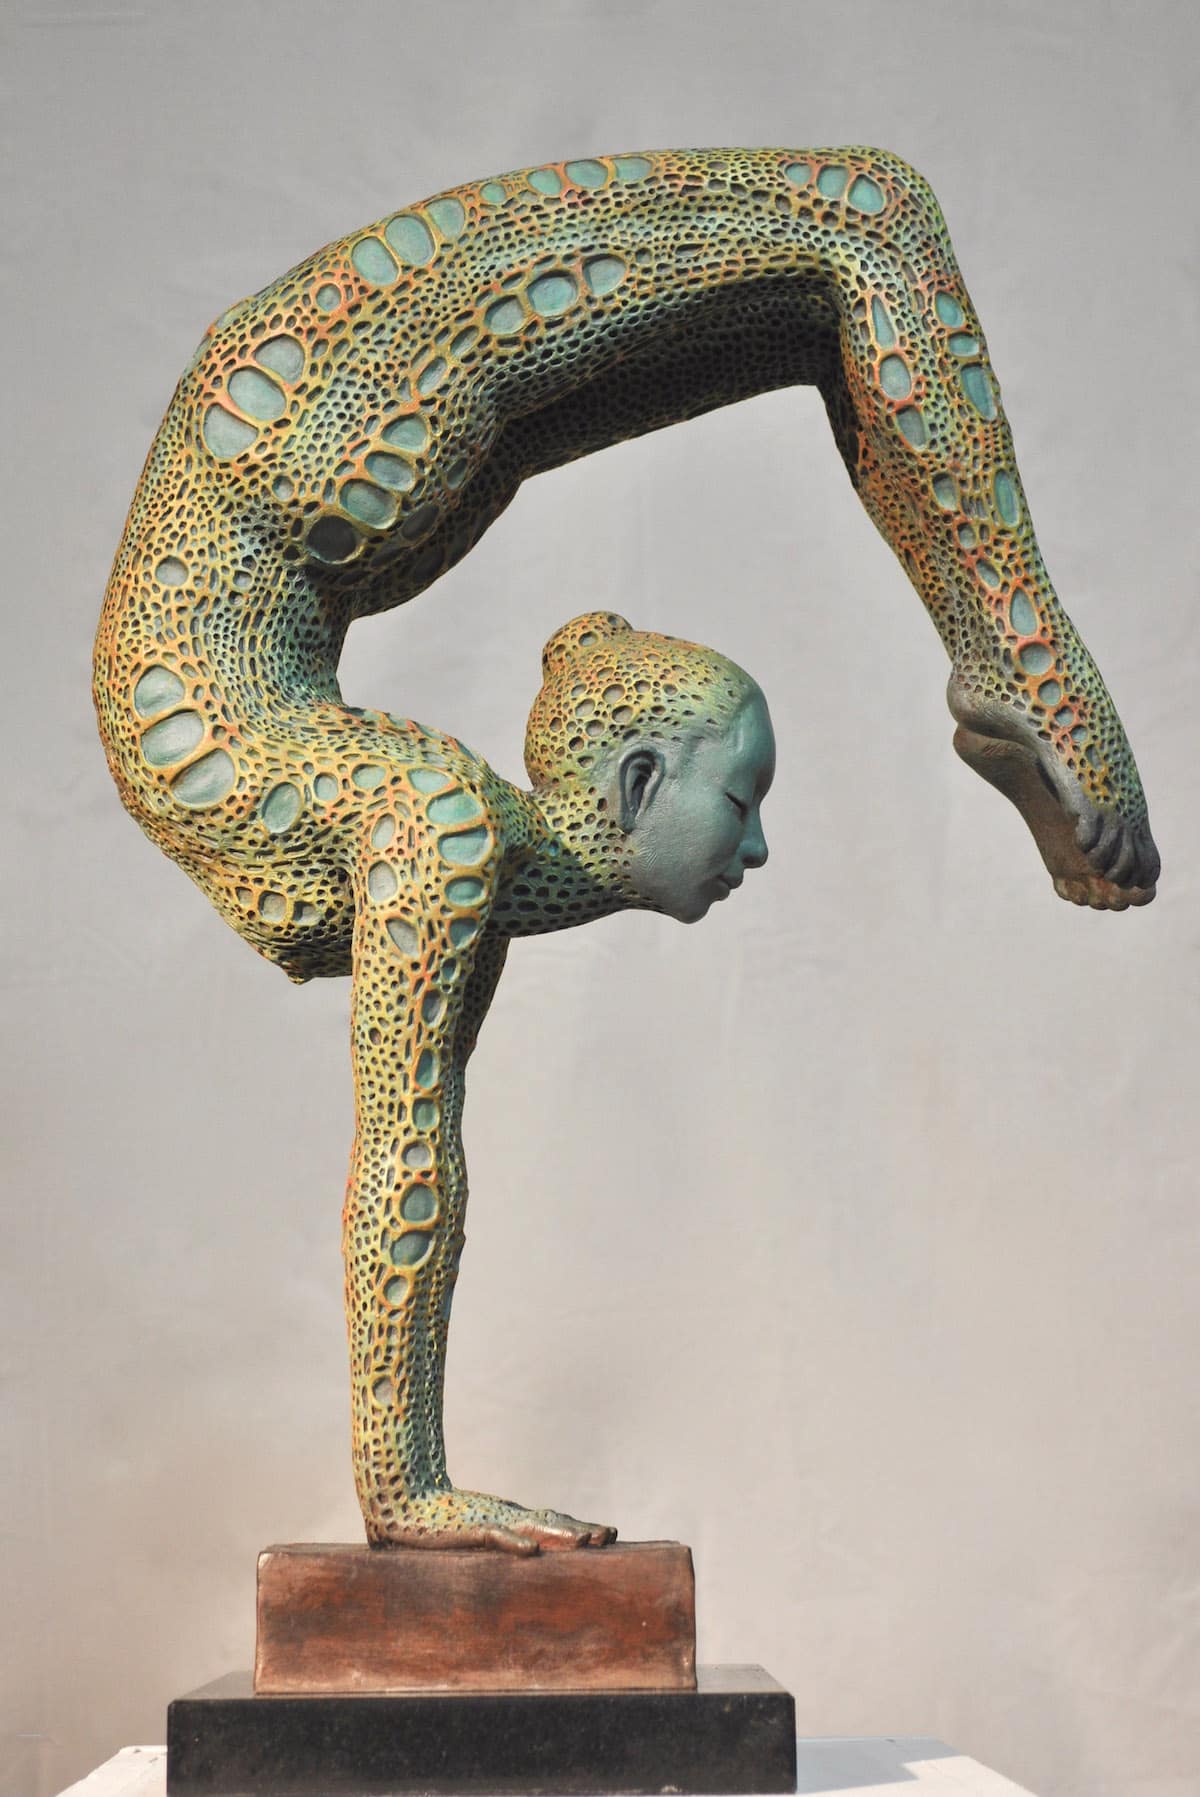 The Beauty Of Nature Fused With Elegant Human Movements In Lyrical Sculptures By Jonathan Hateley (7)